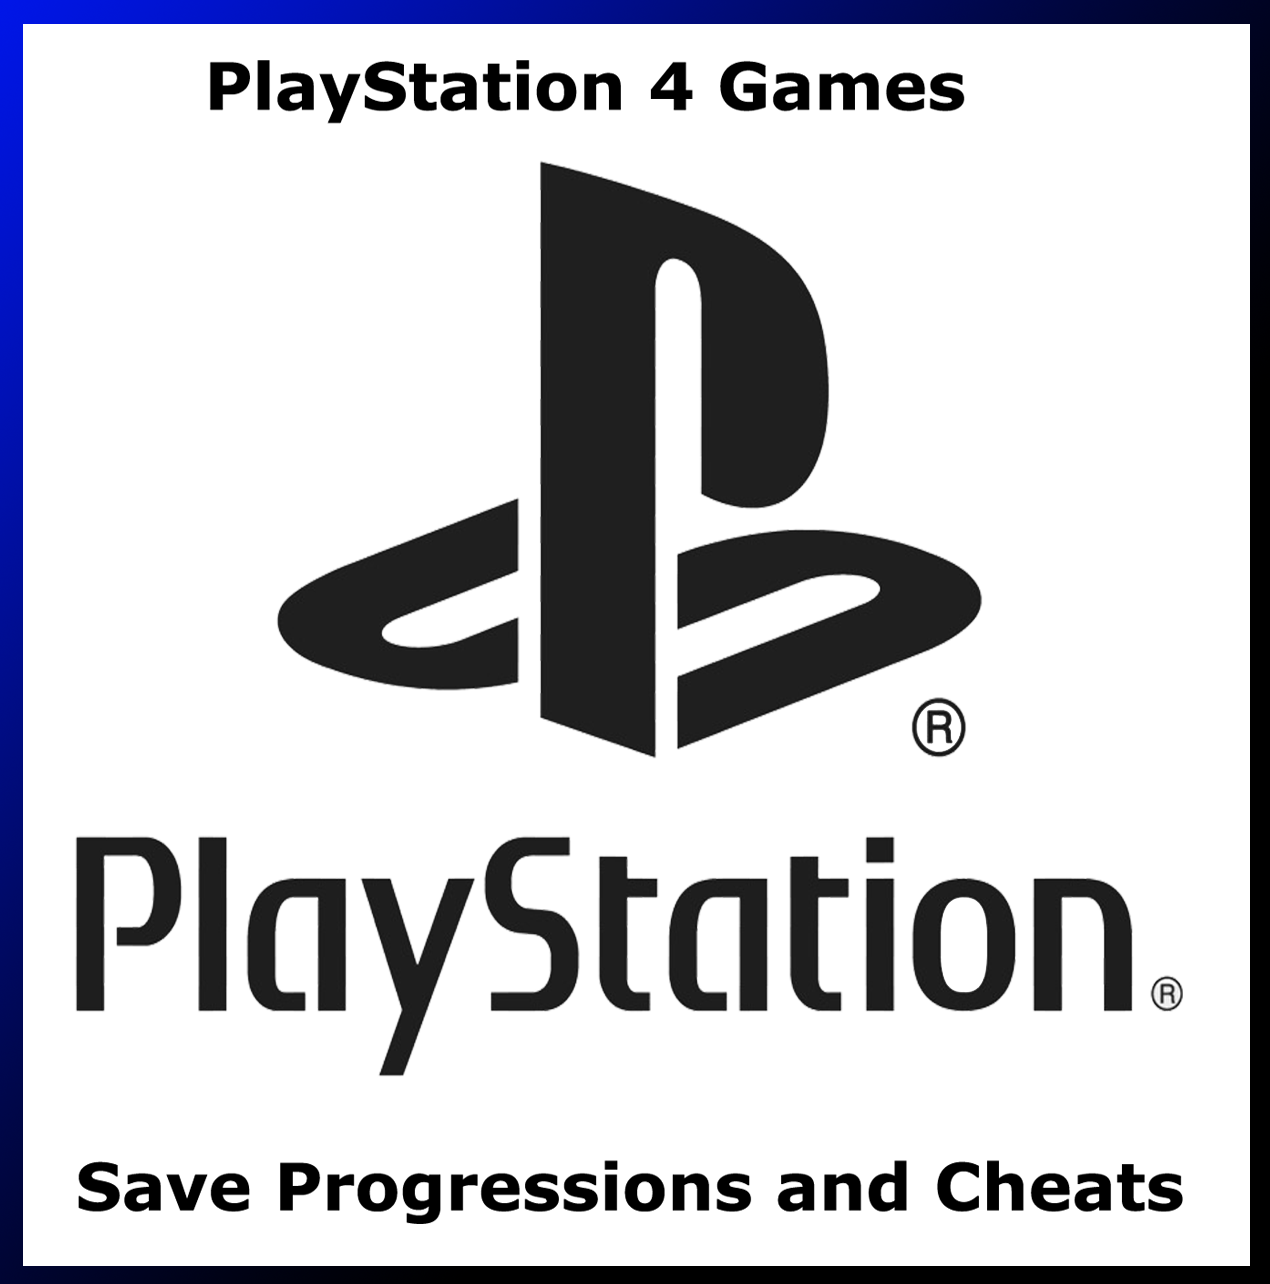 Playstation 4 Other Games, Mods, and Saves